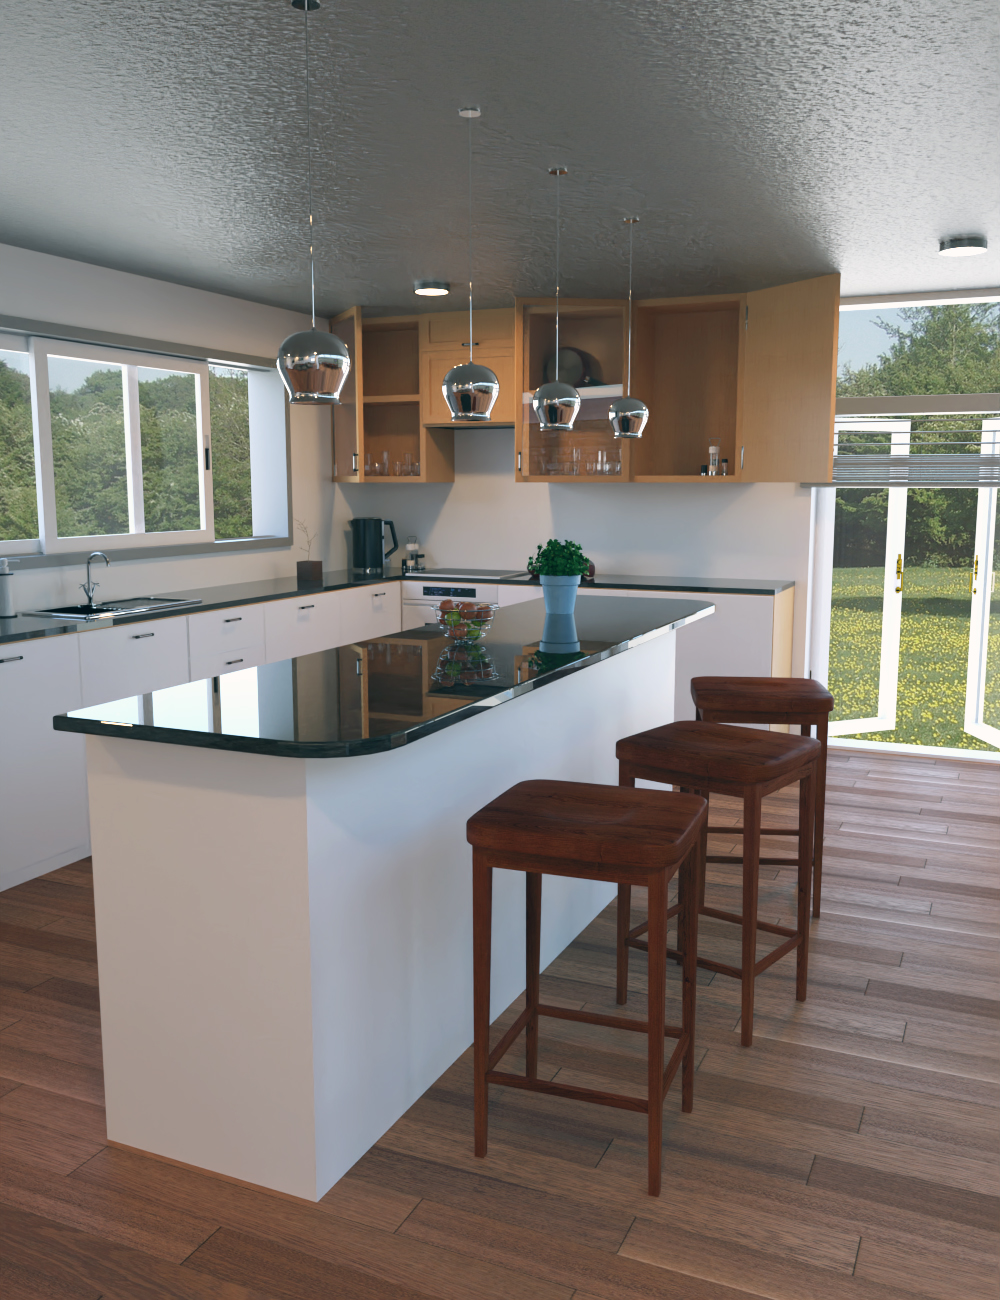 Contemporary Cabin Kitchen by: Tesla3dCorp, 3D Models by Daz 3D